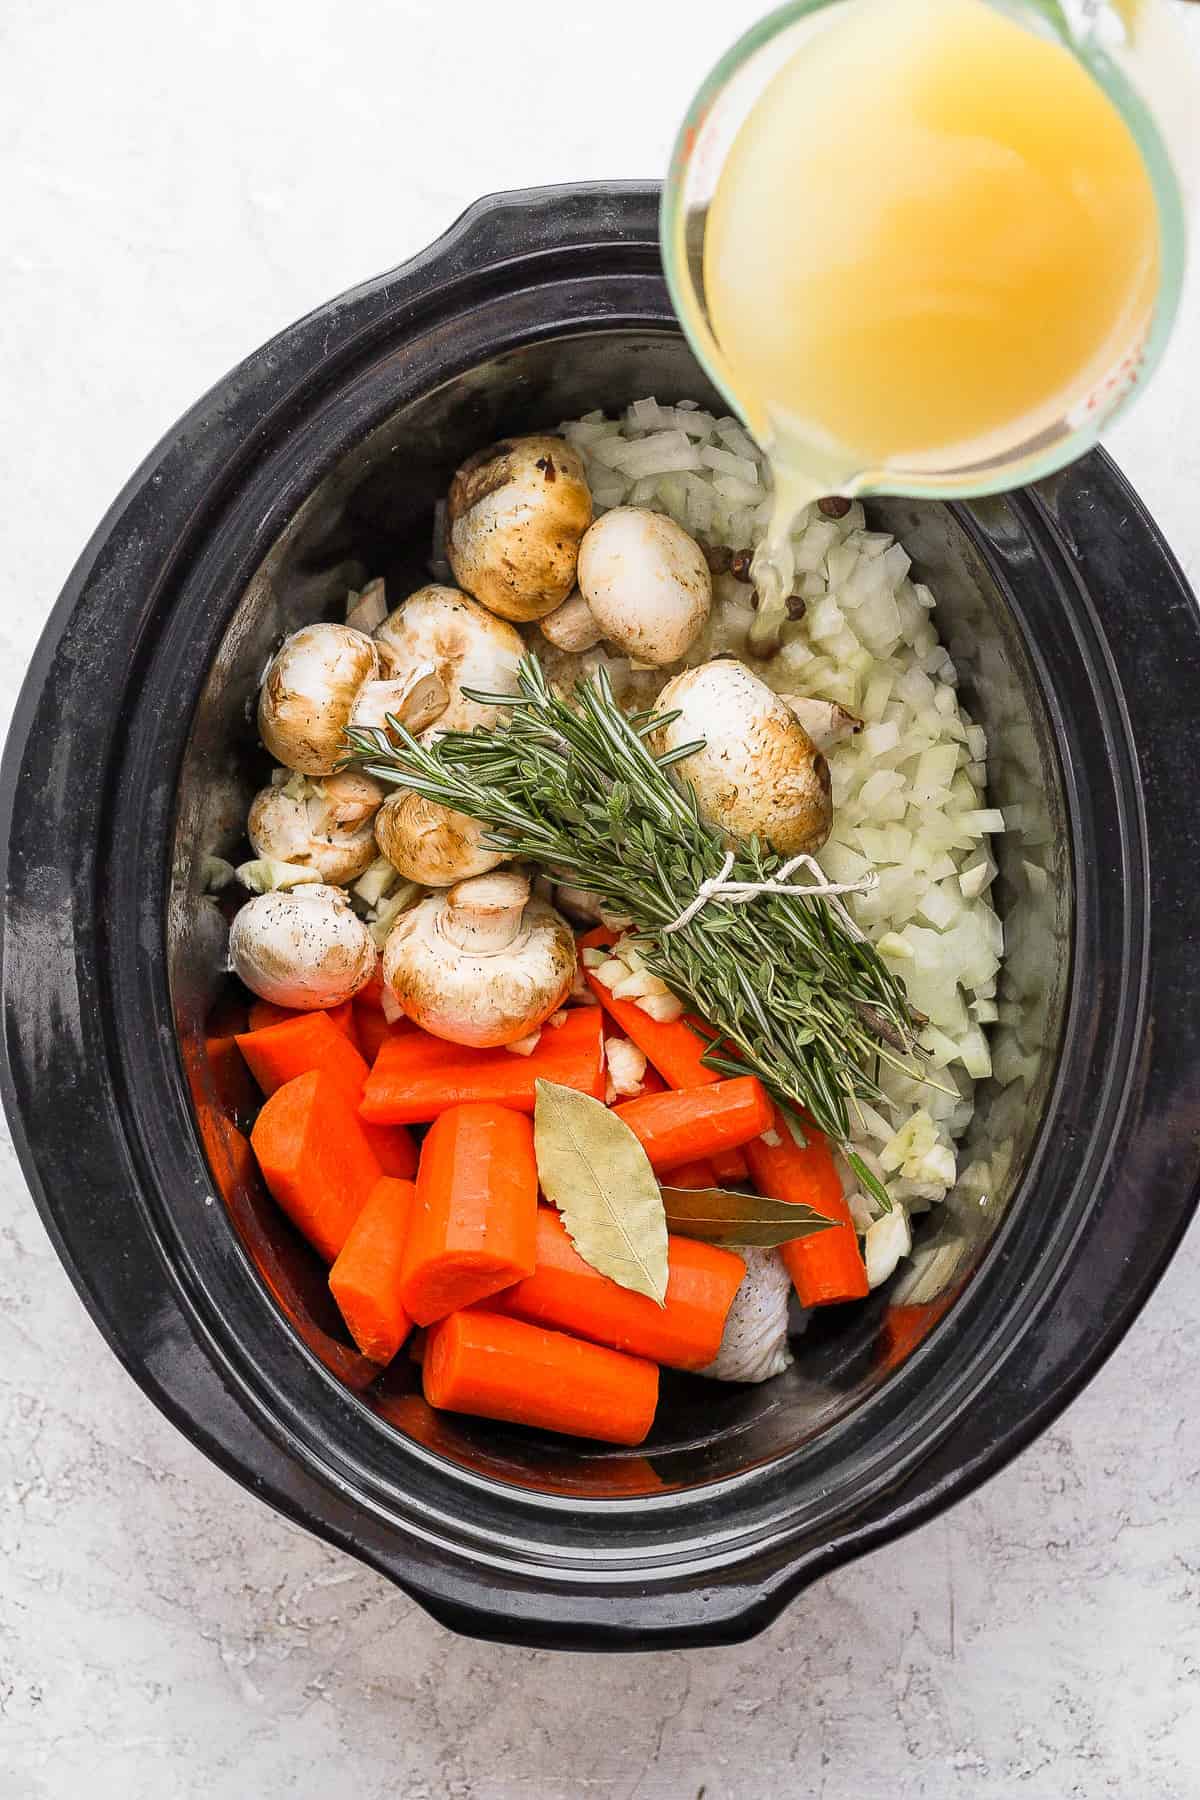 Homemade Slow Cooker Chicken and Dumplings - Fit Foodie Finds